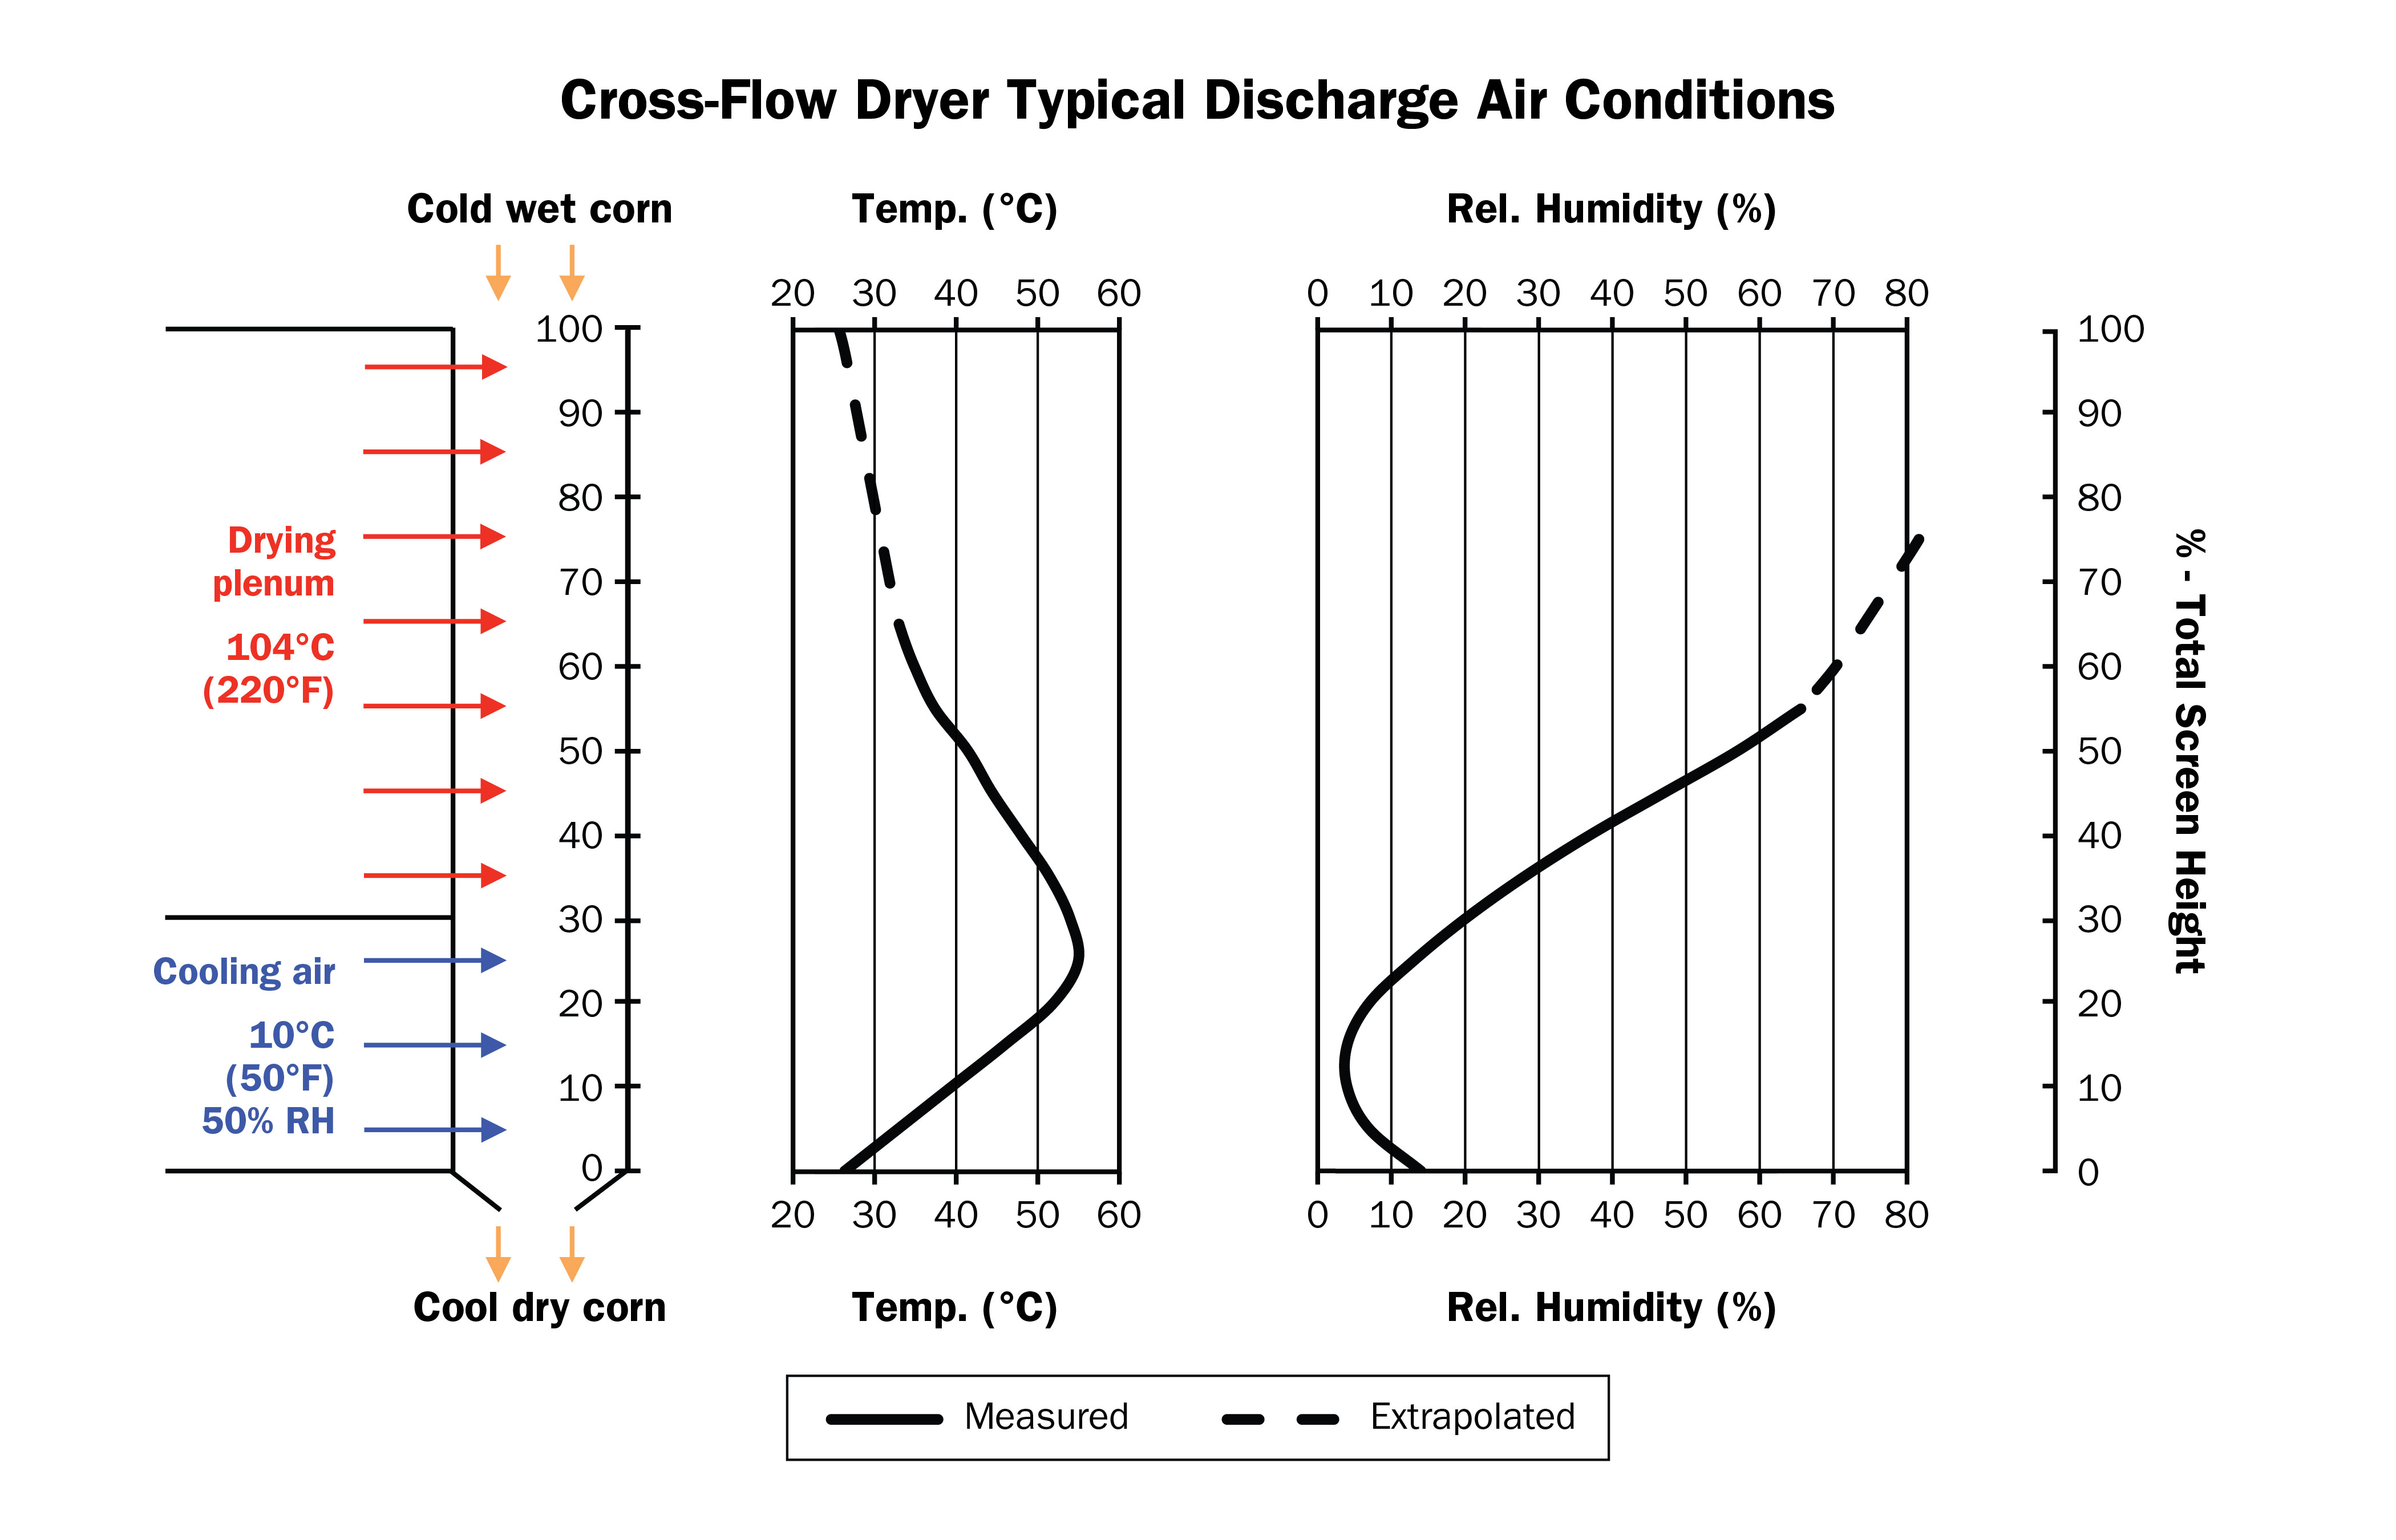 Temperature and relative humidity profiles of the exhaust air from a cross flow grain dryer throughout the drying and cooling process